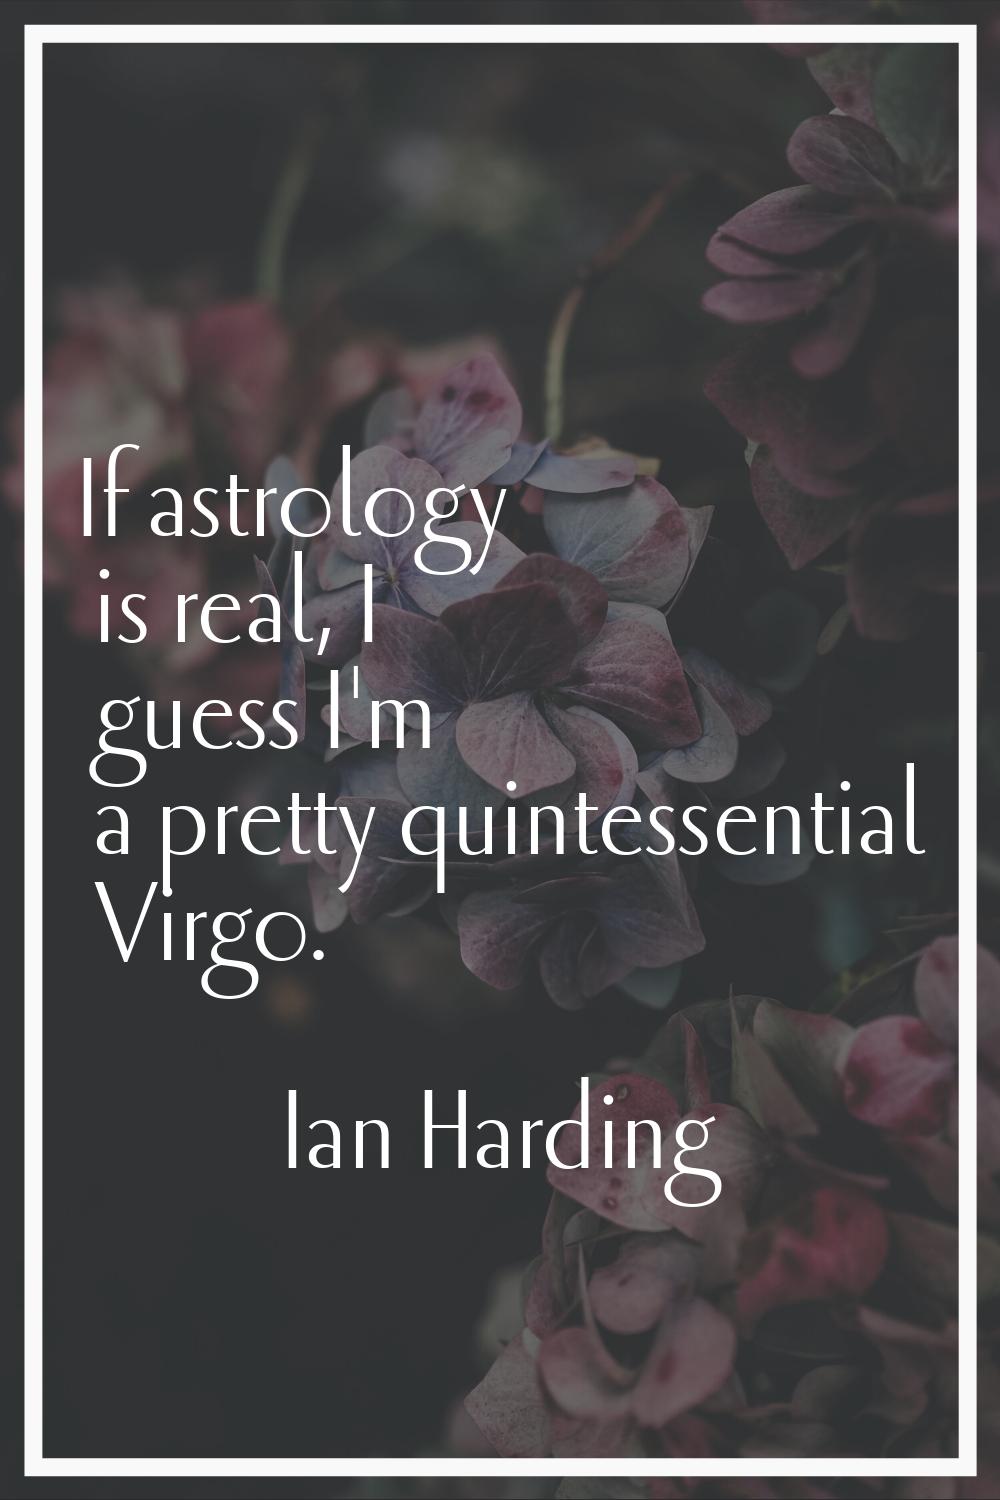 If astrology is real, I guess I'm a pretty quintessential Virgo.